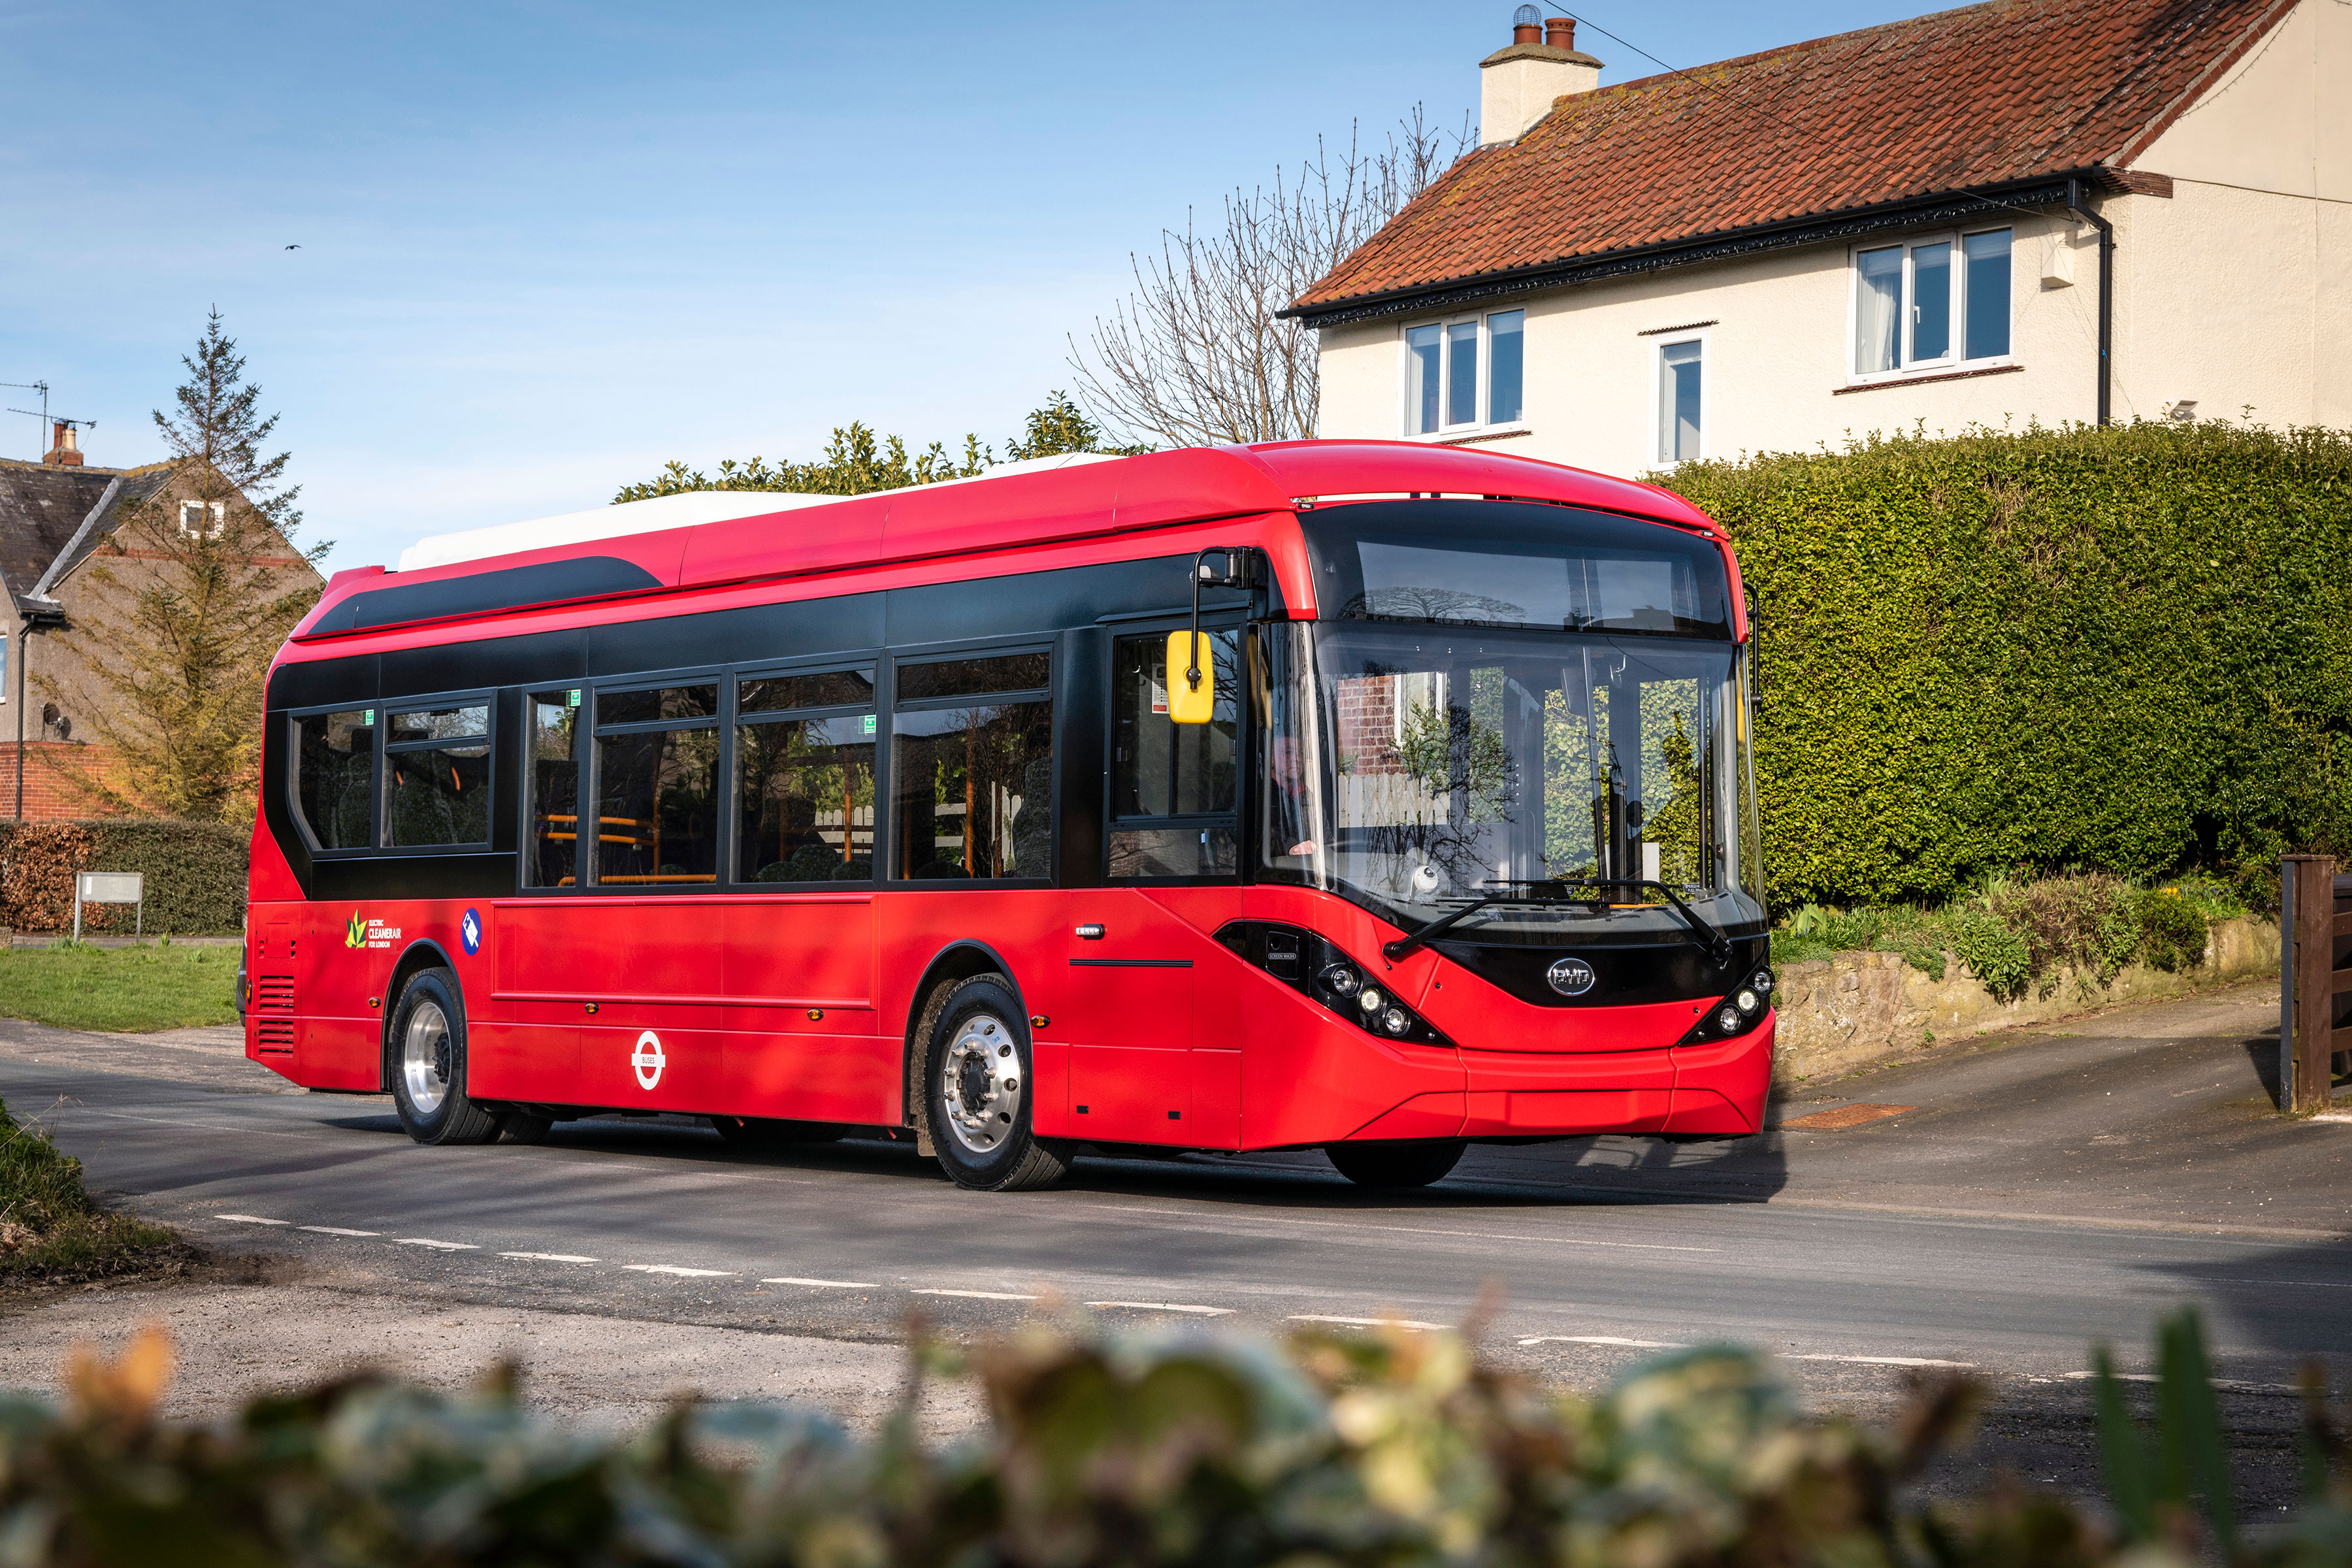 UK’s largest electric bus order received